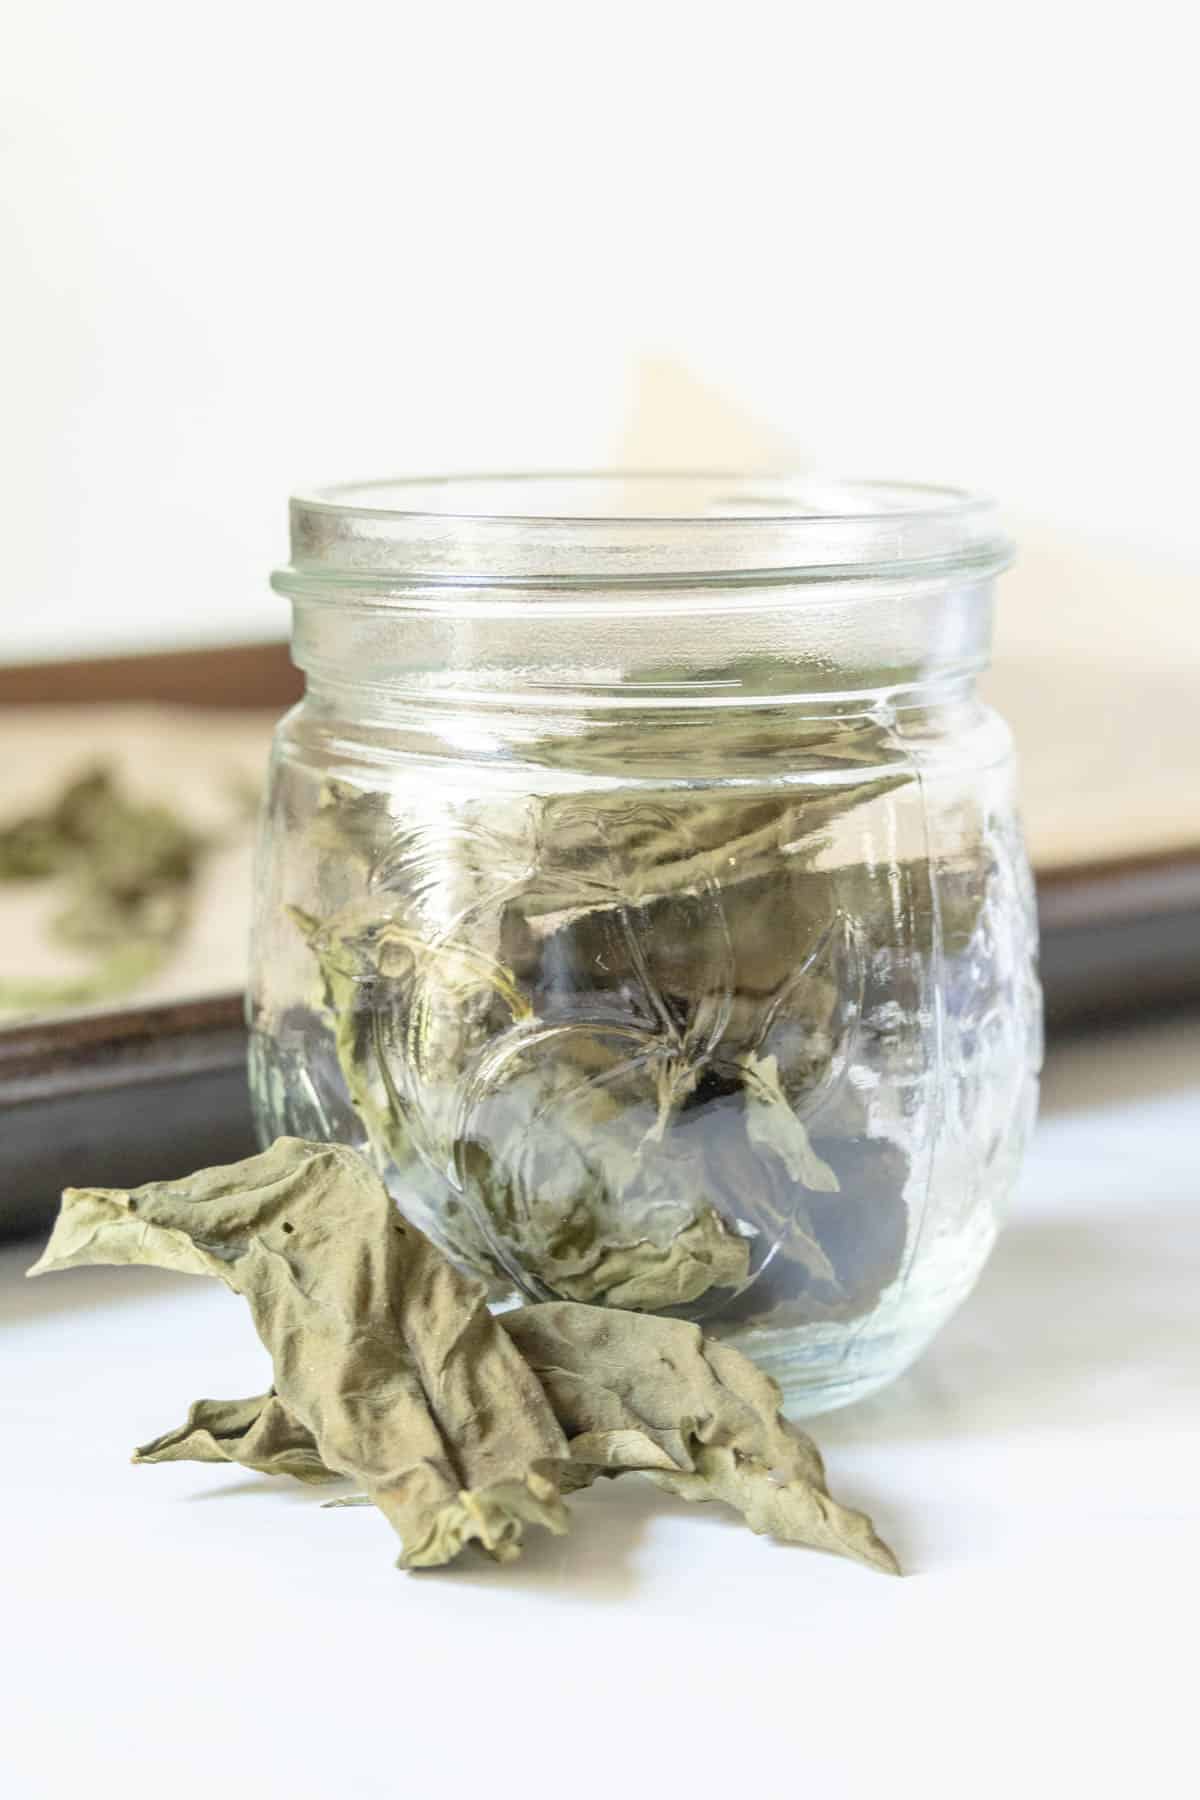 Dried basil leaves in a glass jar with some in front of the jar.